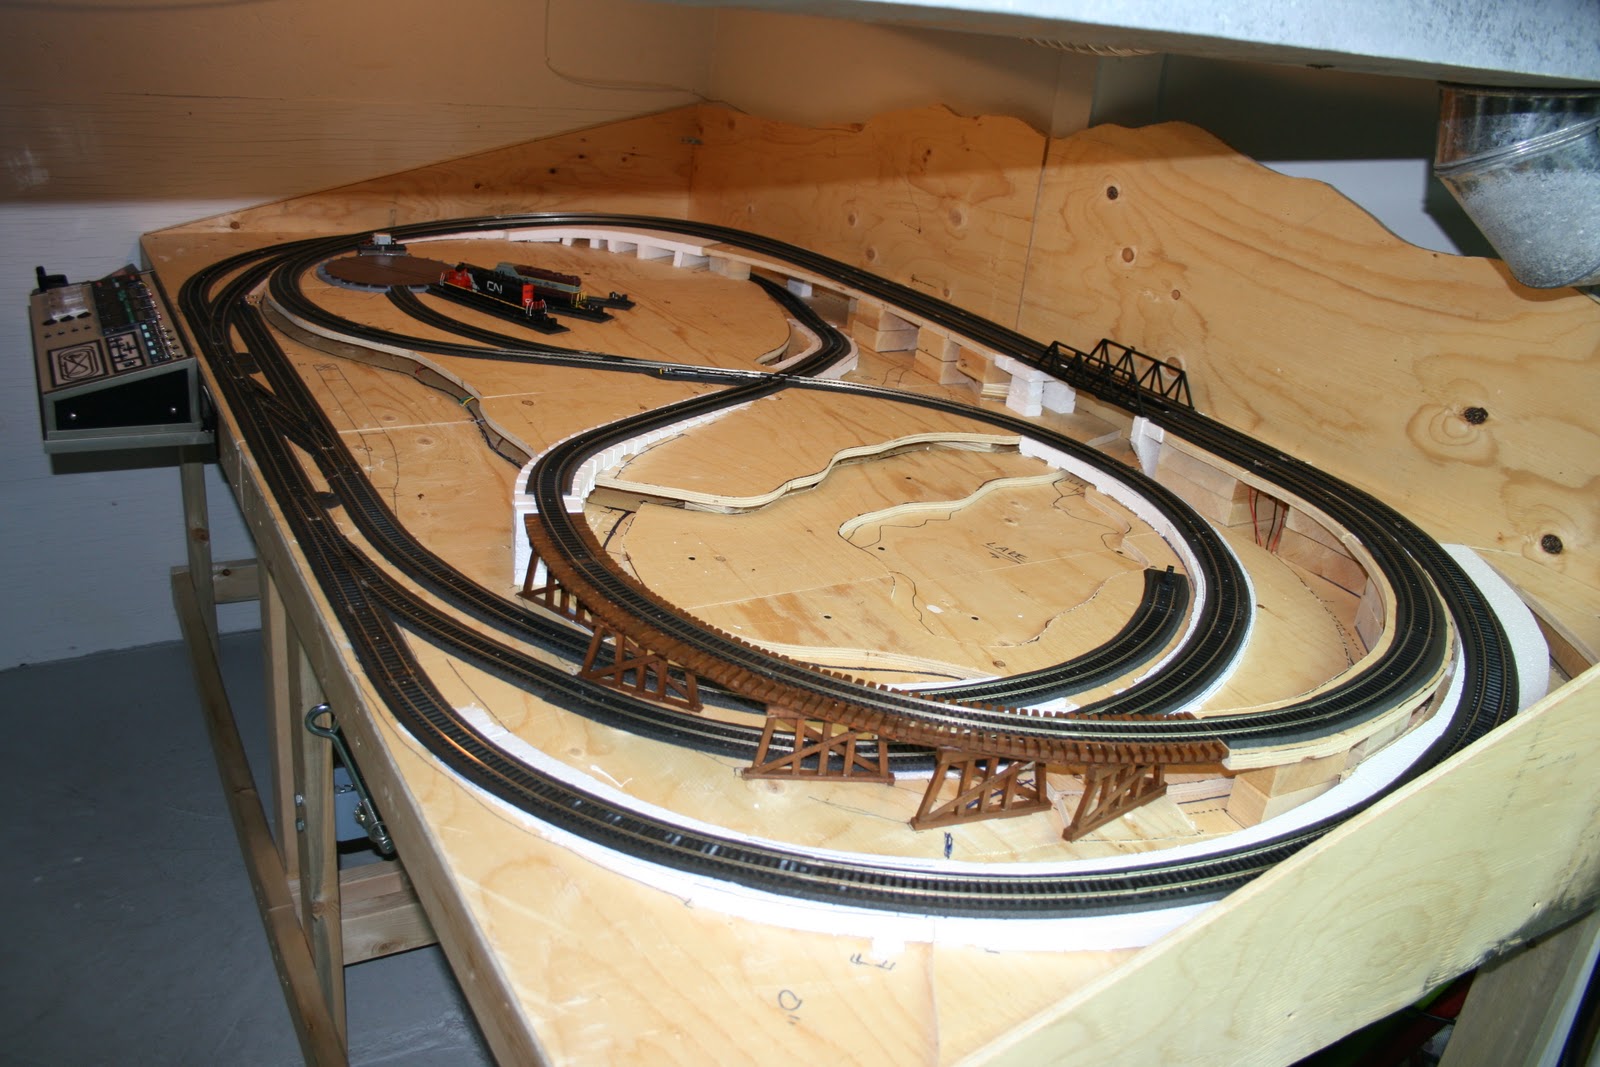 train 4 by 8 layouts 3d model train Download eBook here g z s Scale